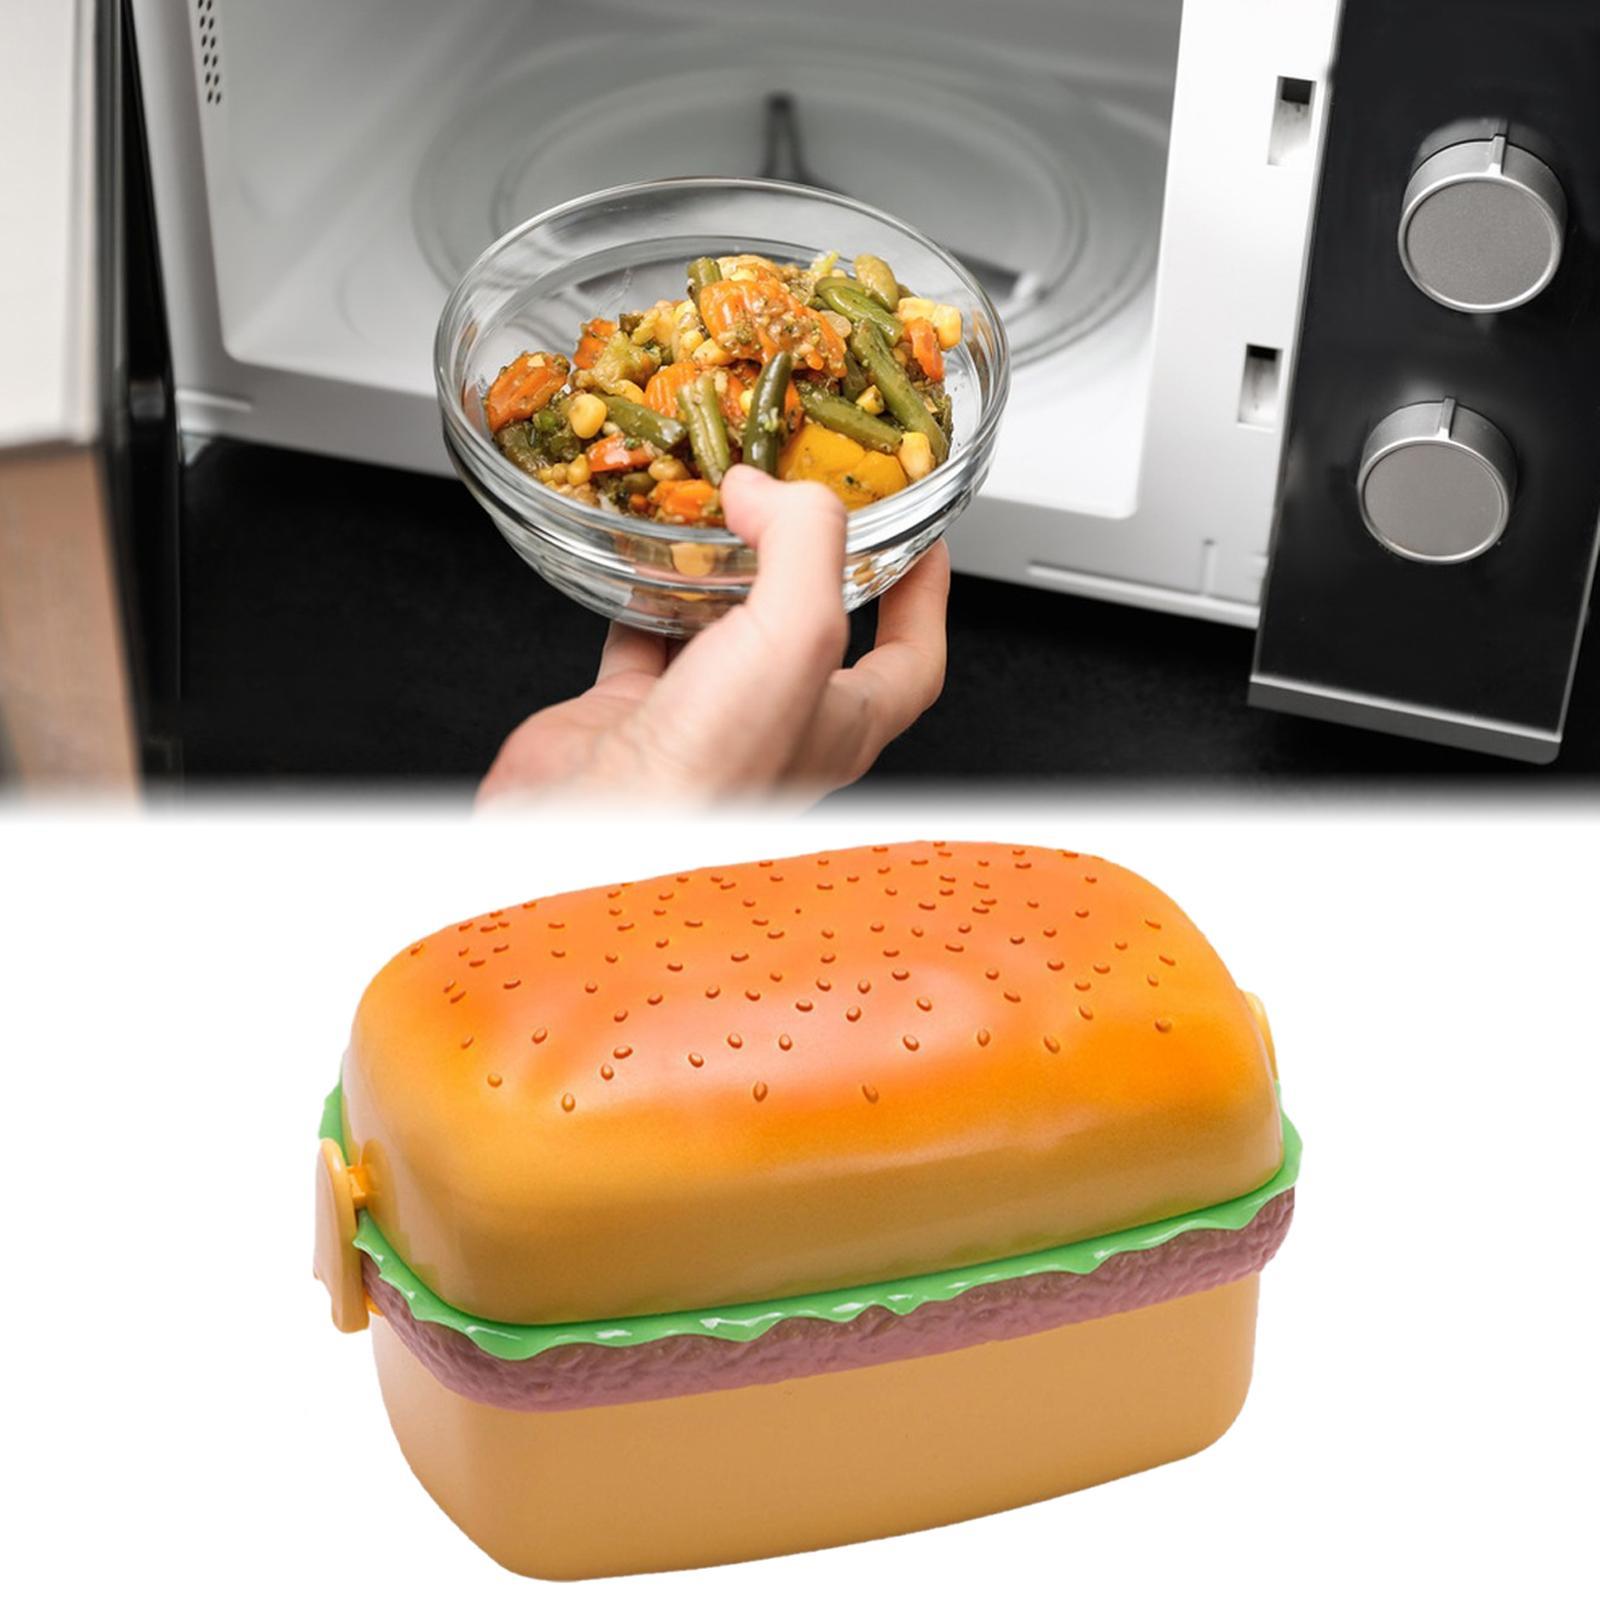 Hamburger Shaped Bento Box Microwave Lunch Box for Hot or Cold Food Storage